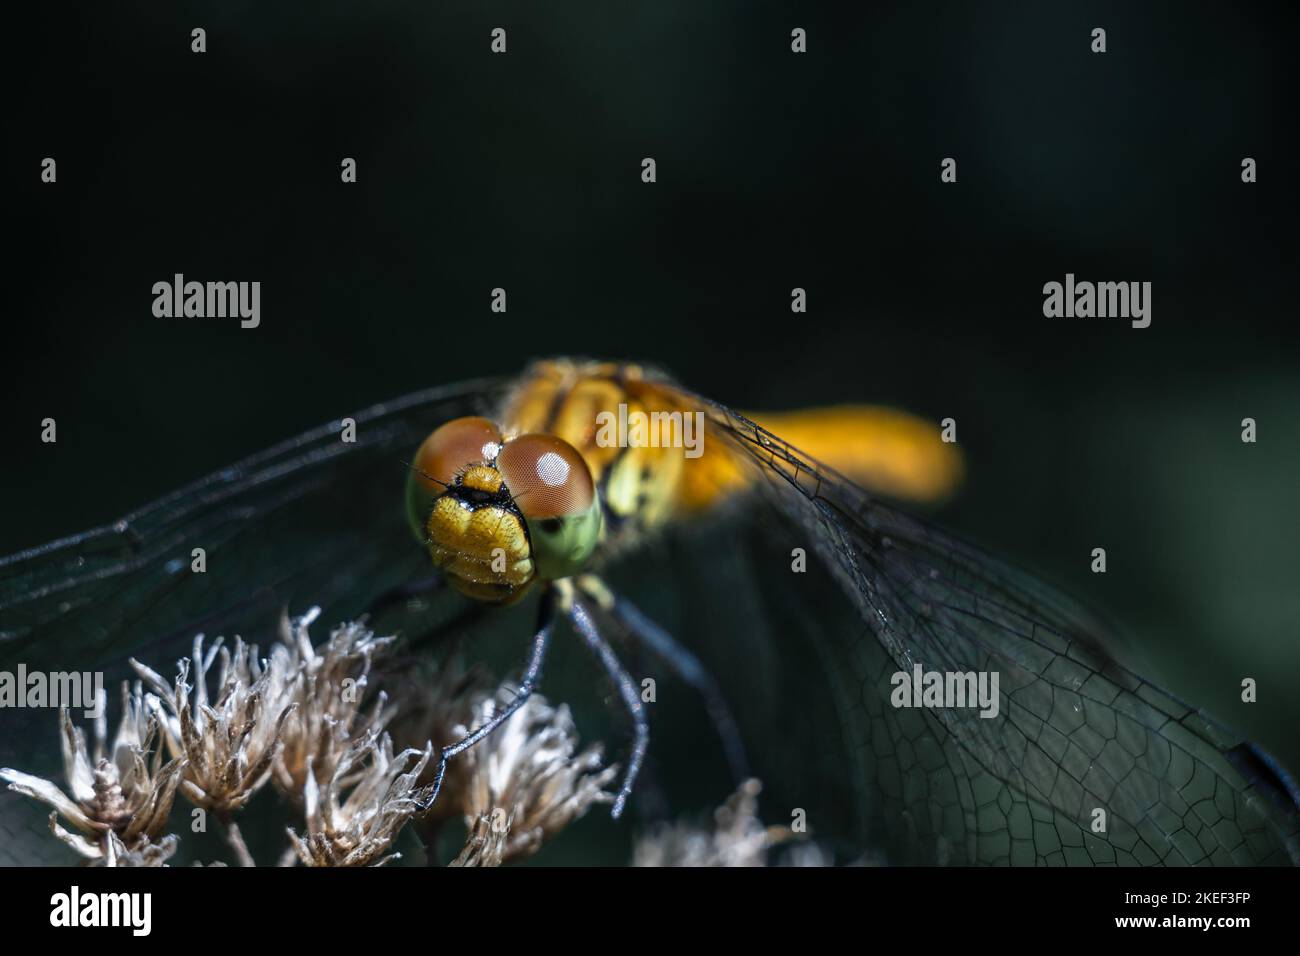 Dragonfly photographed close up. Dragonfly on a branch of grass. Stock Photo